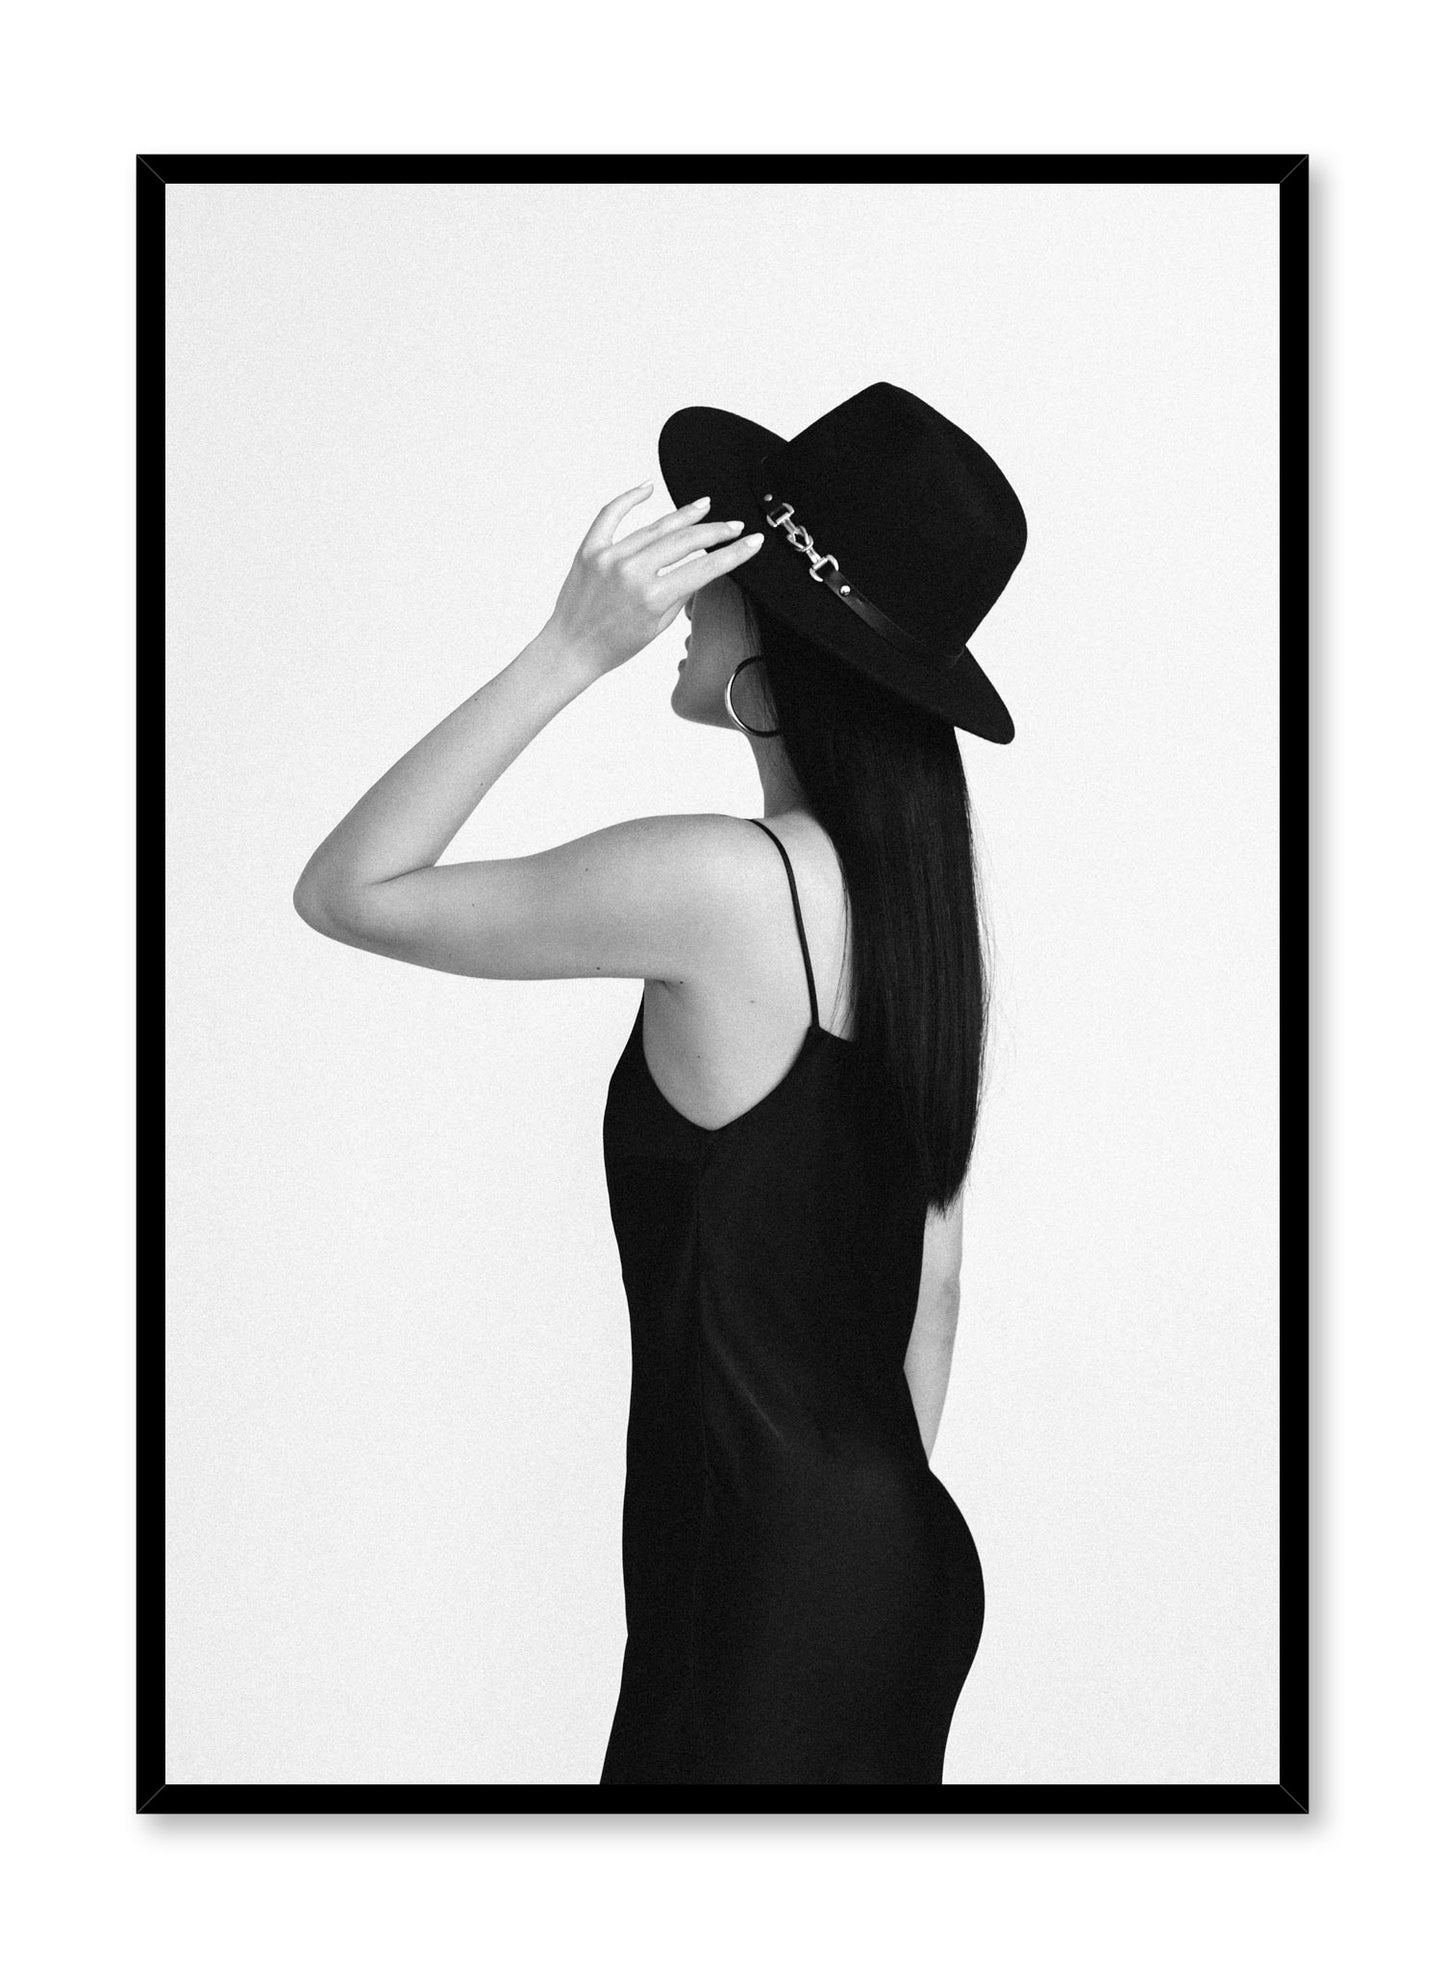 Black and white fashion photography poster by Opposite Wall with woman in fashionable outfit